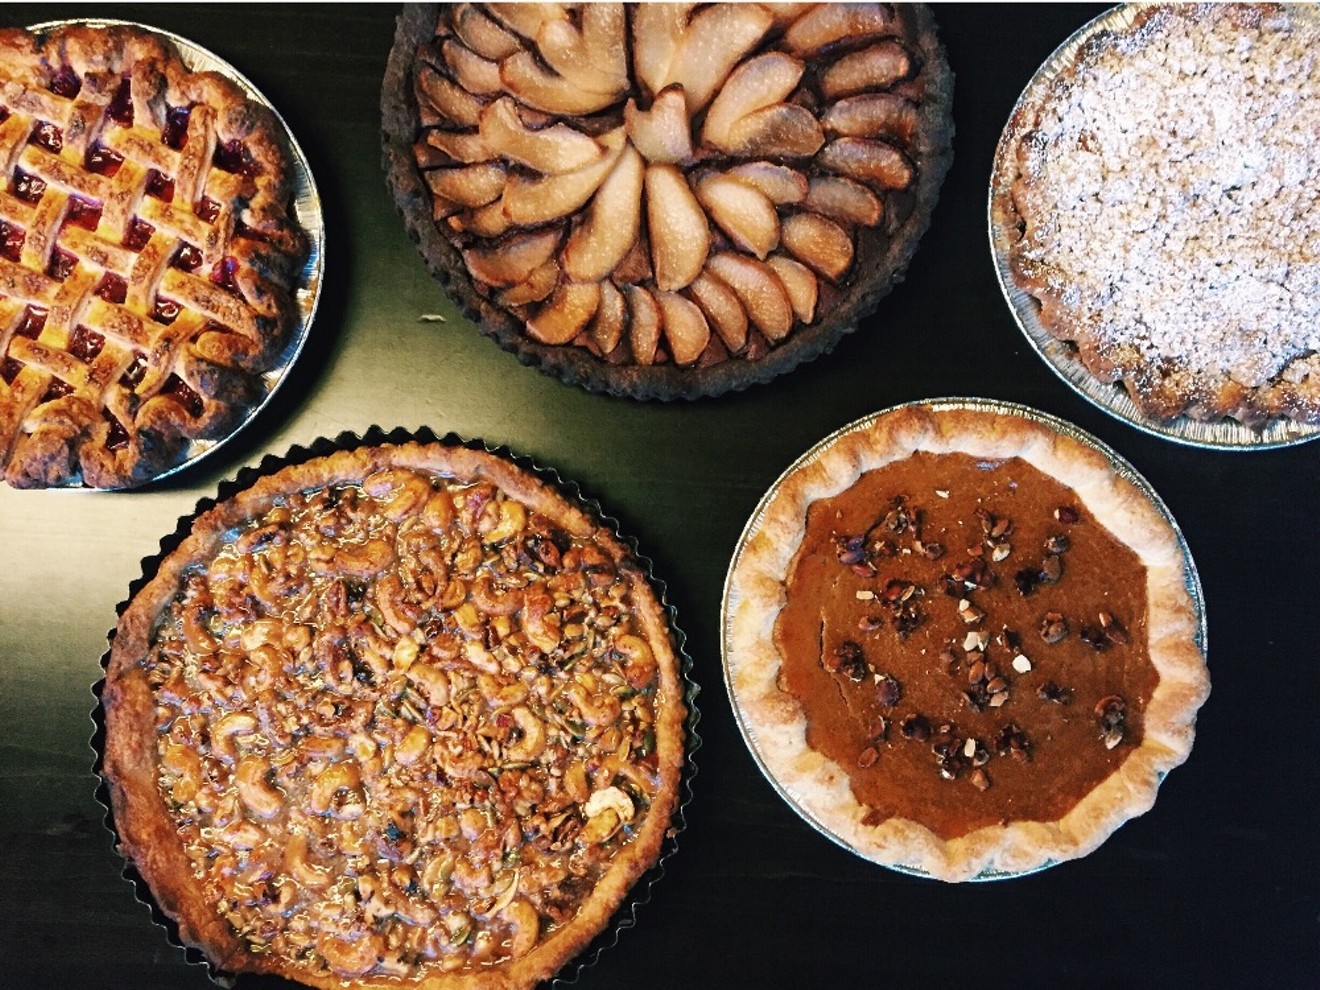 Spruce & Lark will feature pies and other pastries and breads from chef Alicia Luther Clardie when it opens in early 2018.